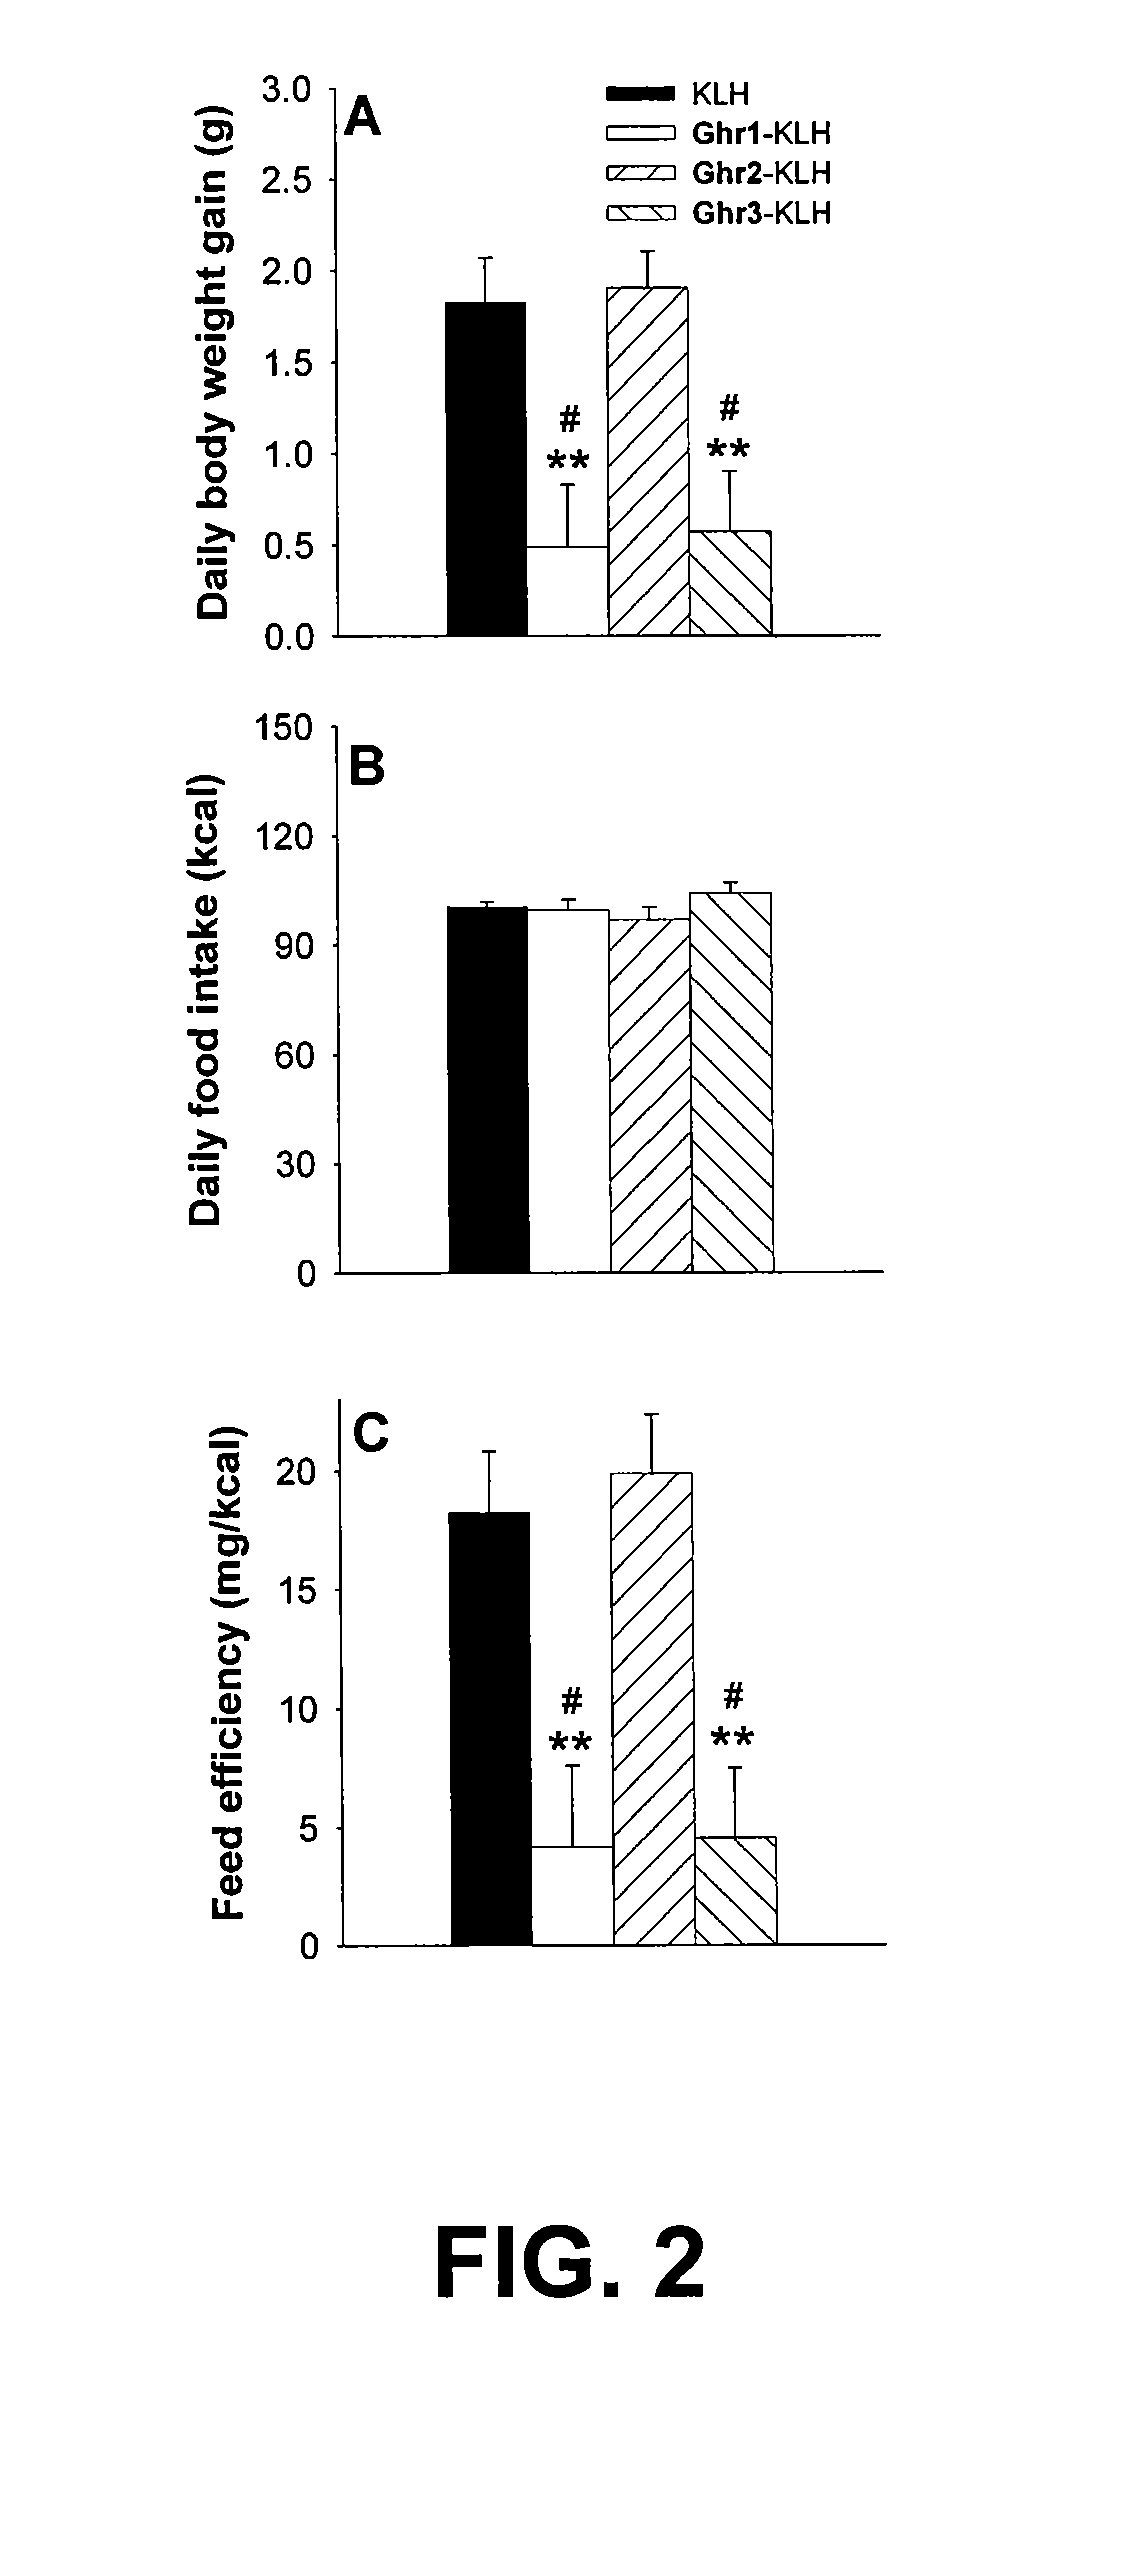 Vaccines and methods for controlling adiposity